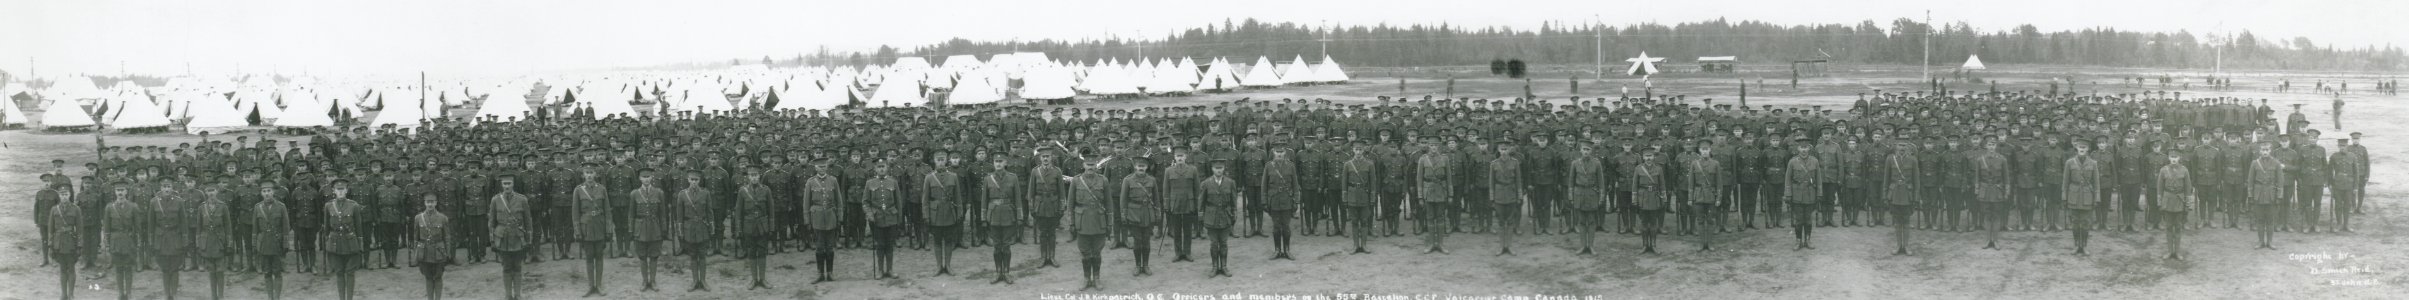 Lt.-Col. J.R. Kirkpatrick, OC, officers and members of the 55th Battalion, CEF, Valcartier Camp, Canada, 1915. No. 9 (HS85-10-30691) photo